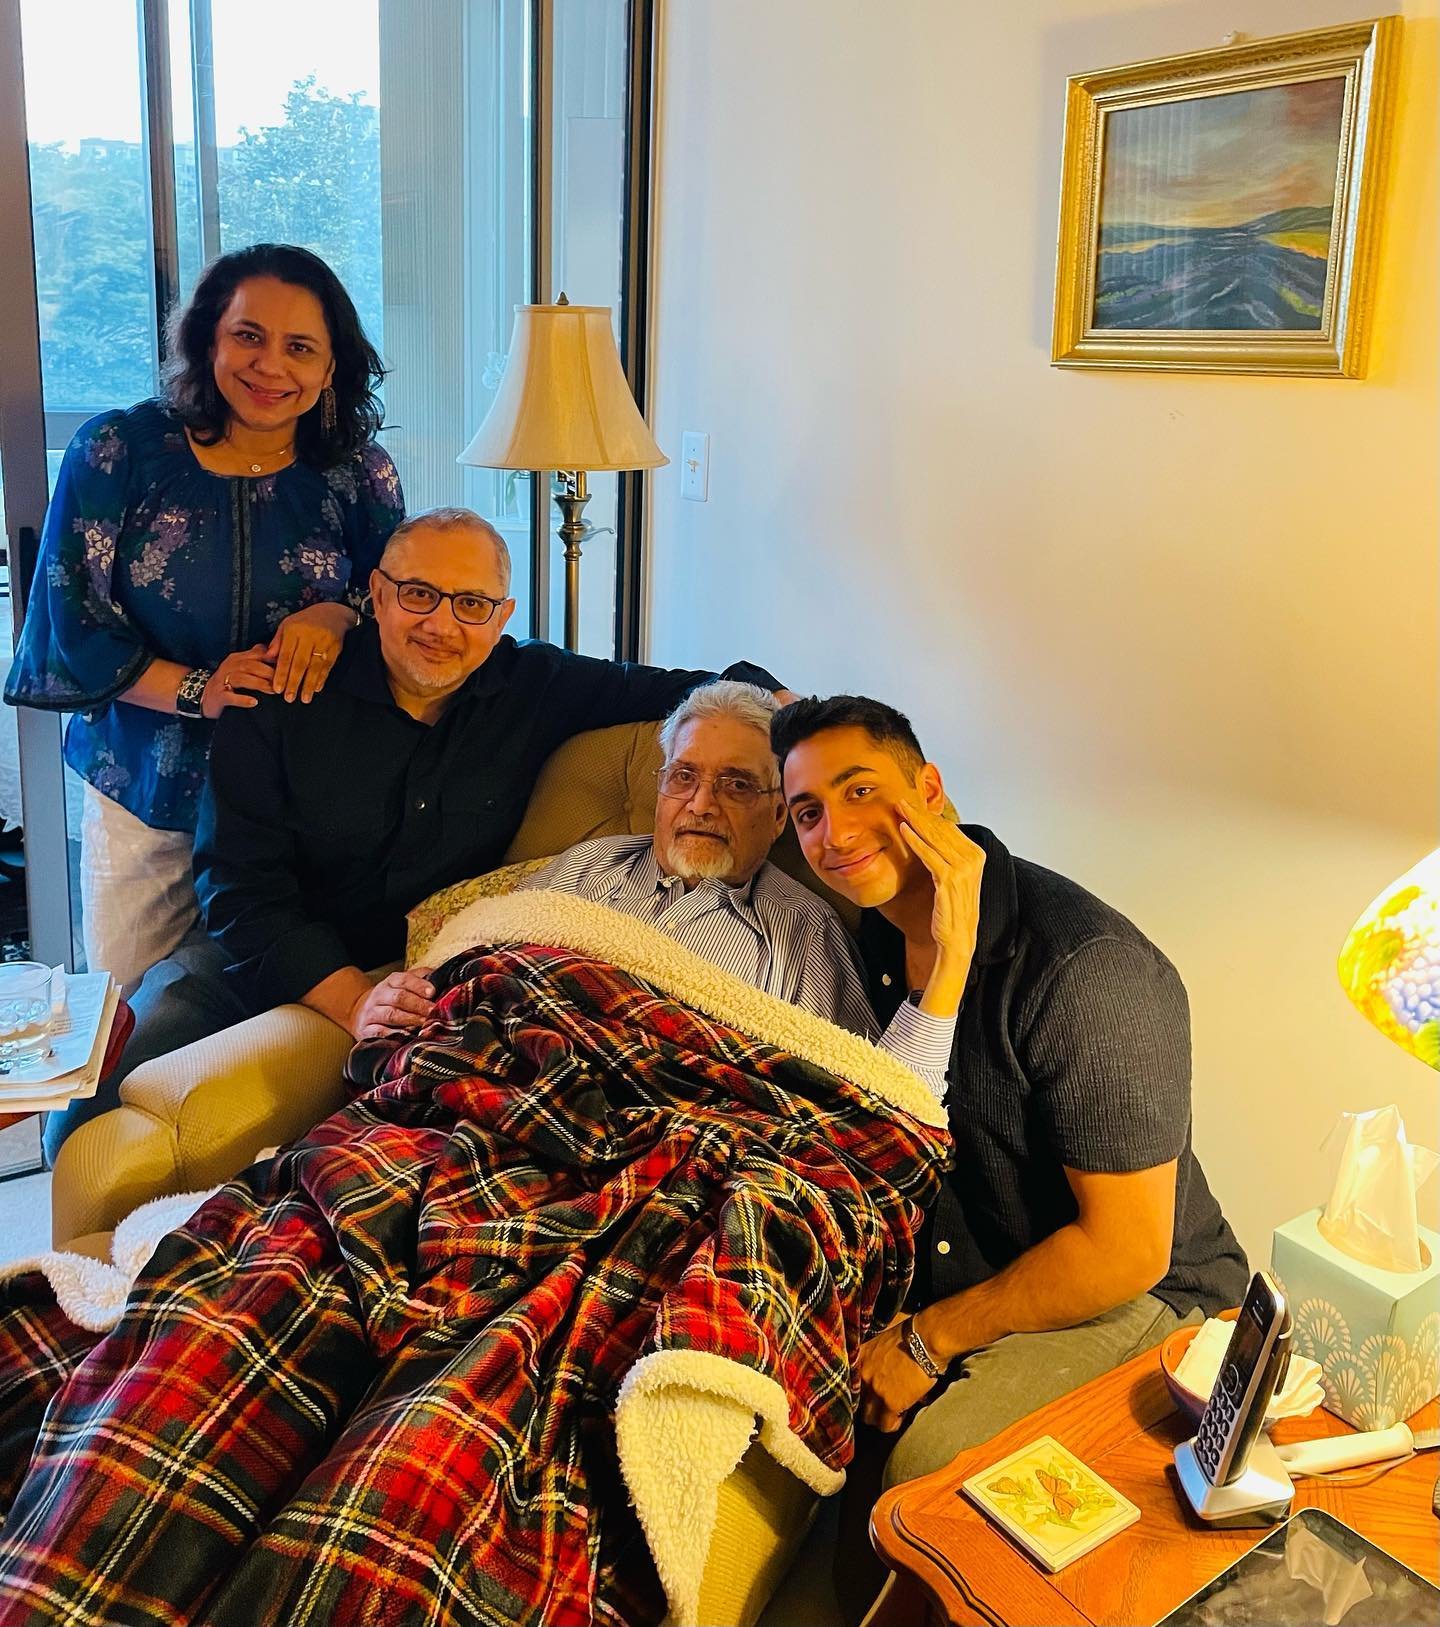 My father in law has not been well; to be honest, he&rsquo;s really not been well. Yesterday was his 89th birthday - what a gift on Father&rsquo;s Day.  He rallied. Left his bed for the first time in weeks; we wheelchaired him to his favorite recline